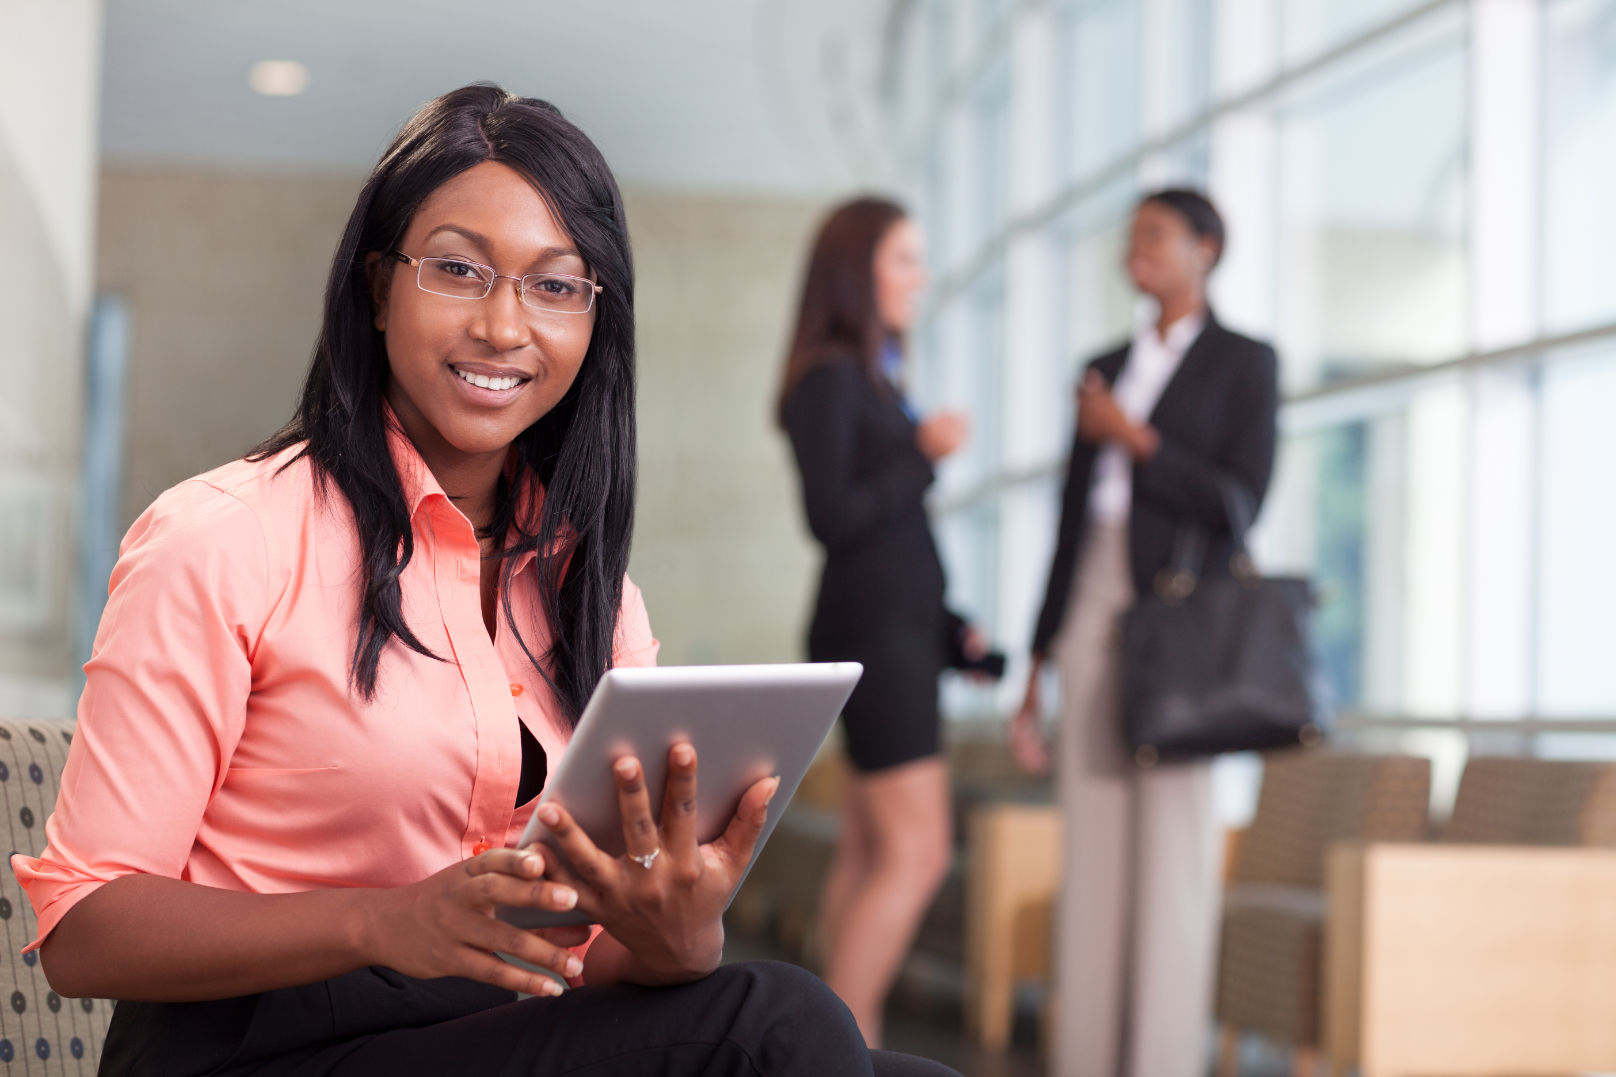 african-american business woman sitting in lobby with computer tablet, looking at camera, smiling, two business women in background